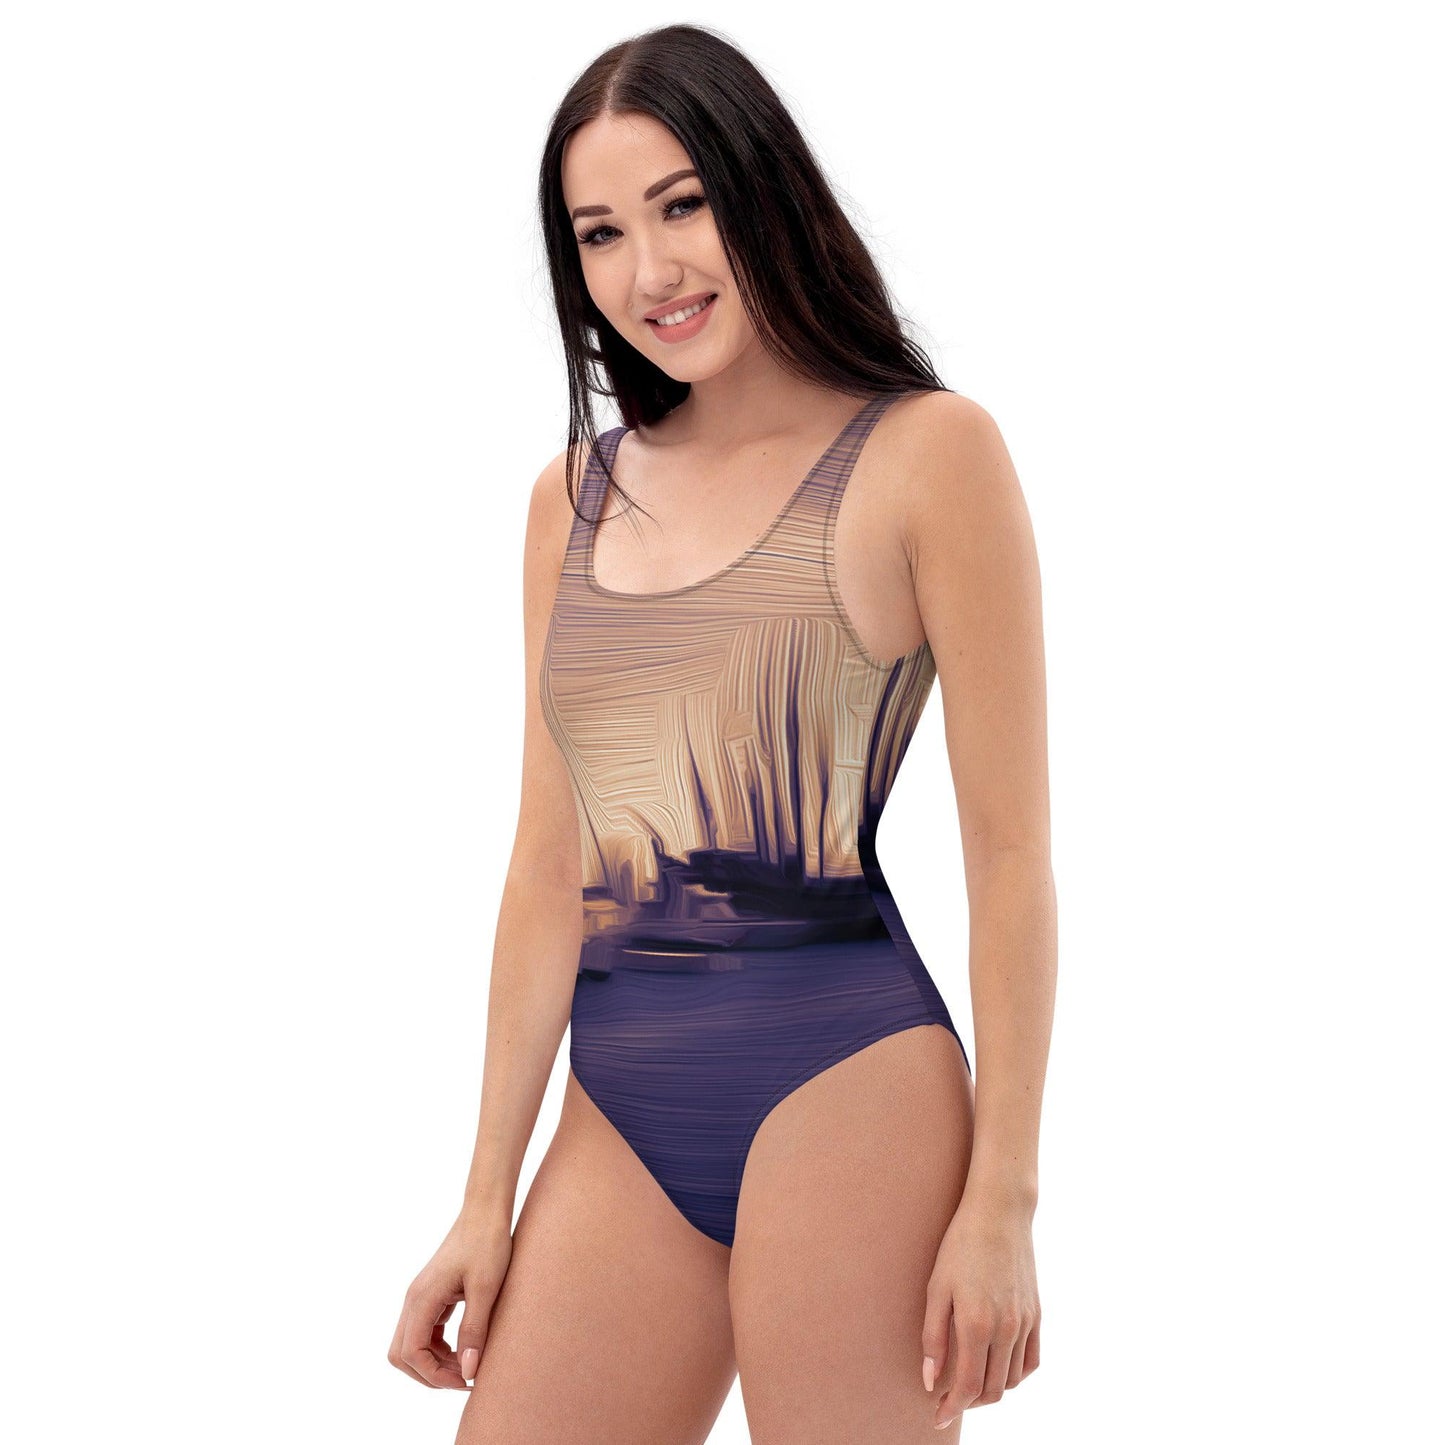 The Sleeping Yachts (at Sunset) - Womens One-Piece Swimsuit - iSAW Company